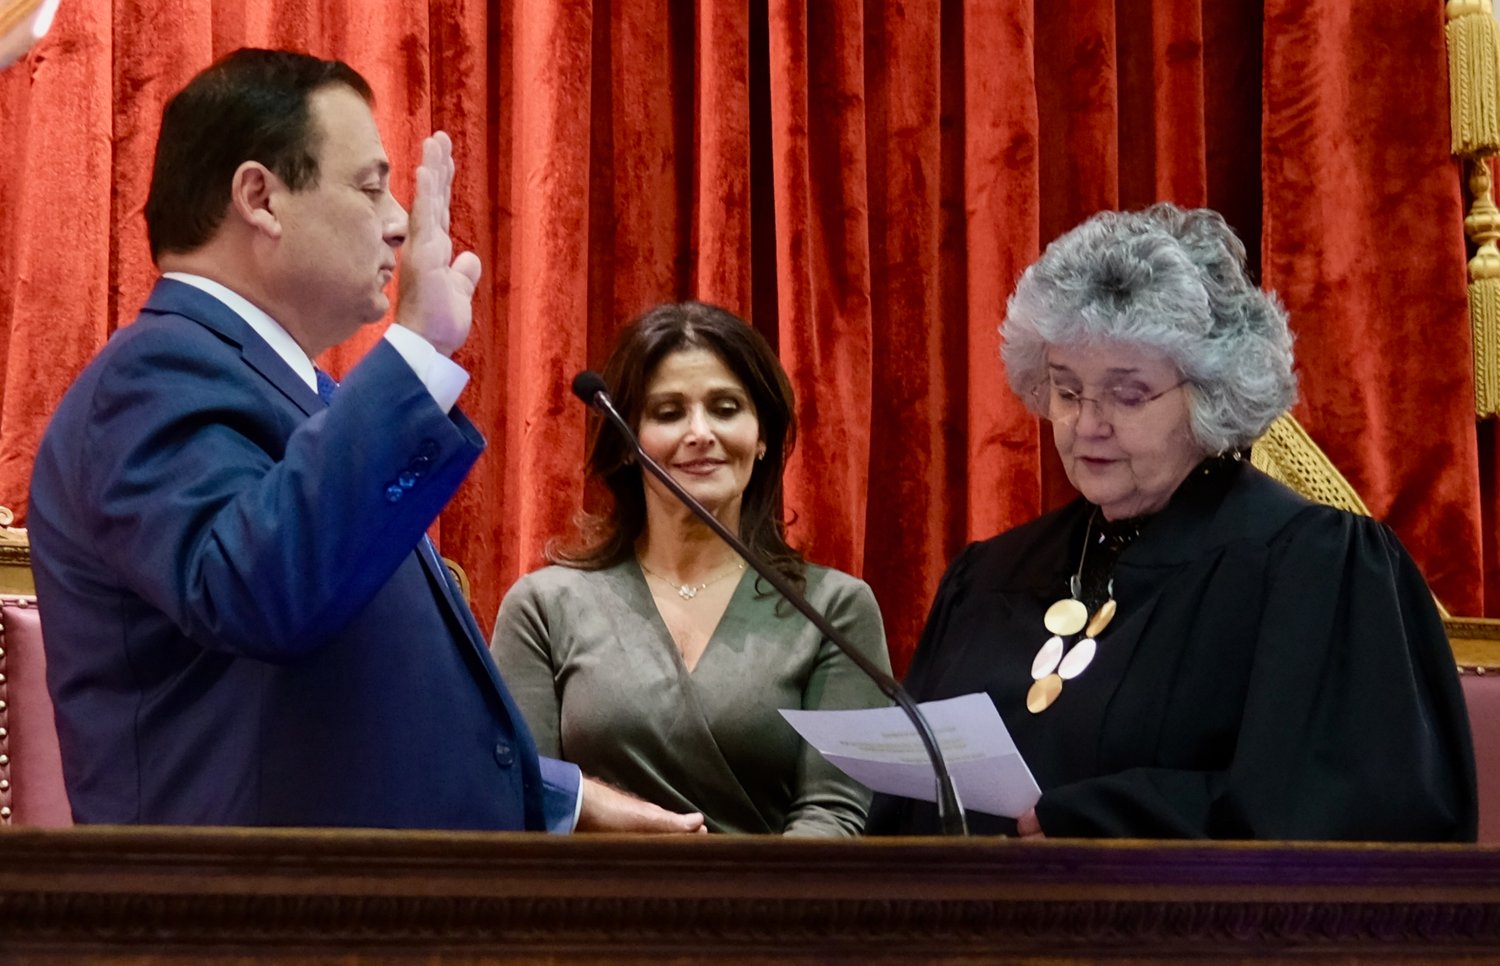 Rep. K. Joseph Shekarchi of Warwick takes the oath of office from Maureen McKenna Goldberg, senior justice of the Rhode Island Supreme Court, after he was reelected House speaker. Looking on is his sister, Mary Shekarchi.